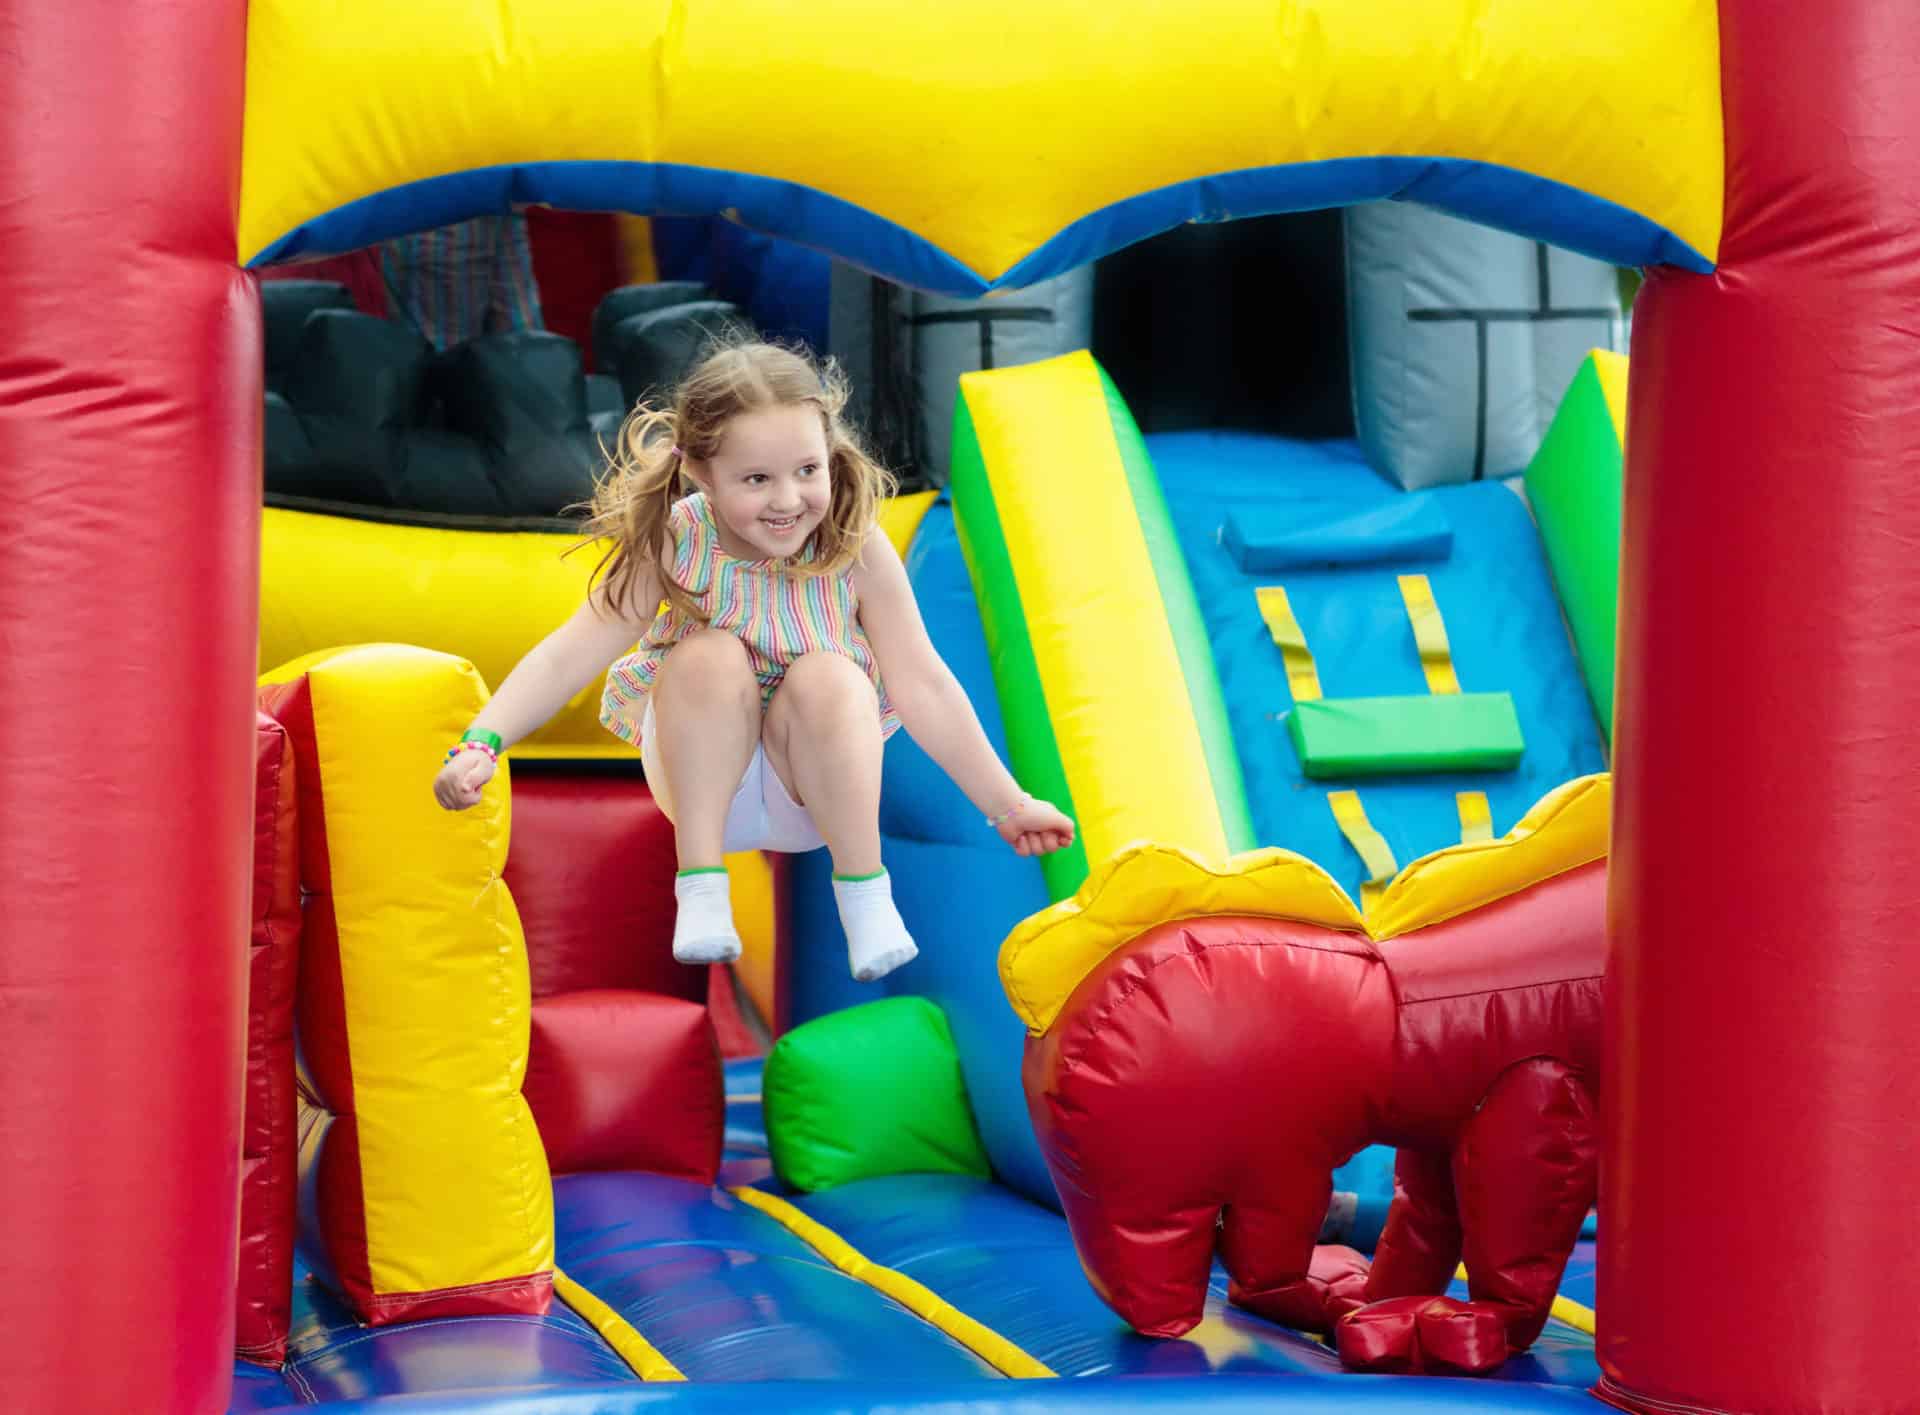 Should New Yorkers Stop Letting Their Kids Play in Bounce Houses?